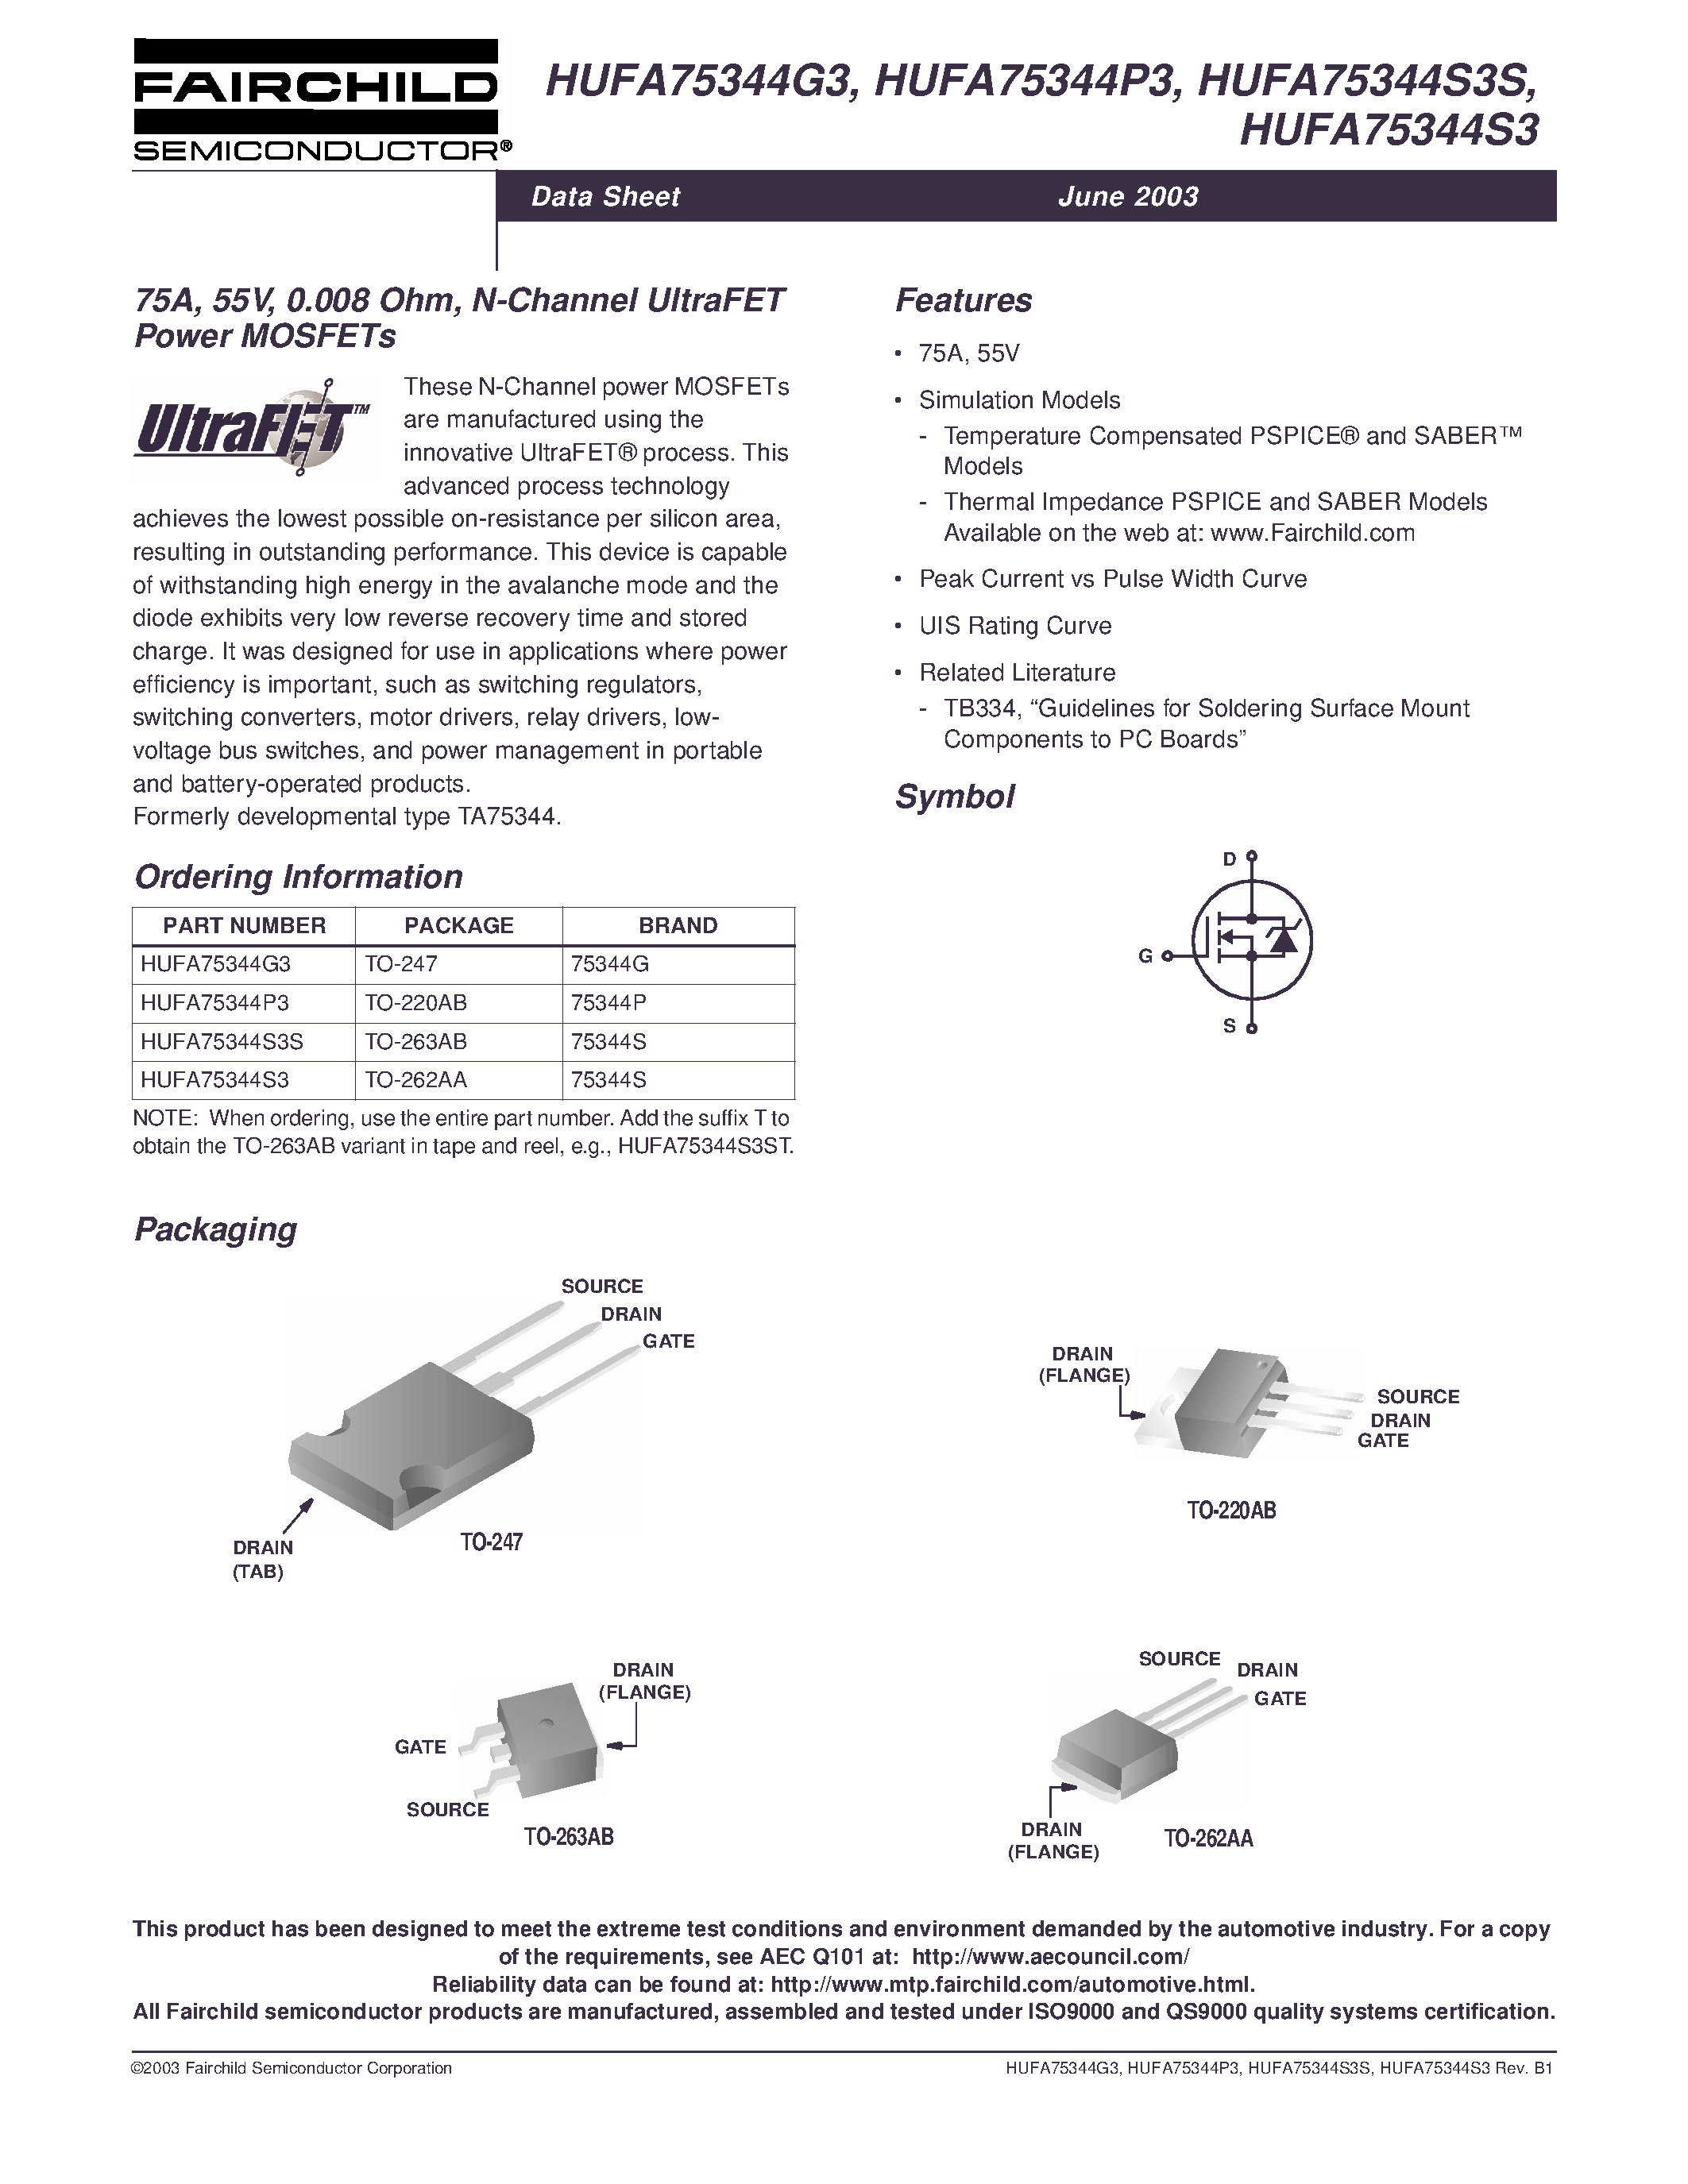 Datasheet HUFA75344S3S - 75A/ 55V/ 0.008 Ohm/ N-Channel UltraFET Power MOSFETs page 1